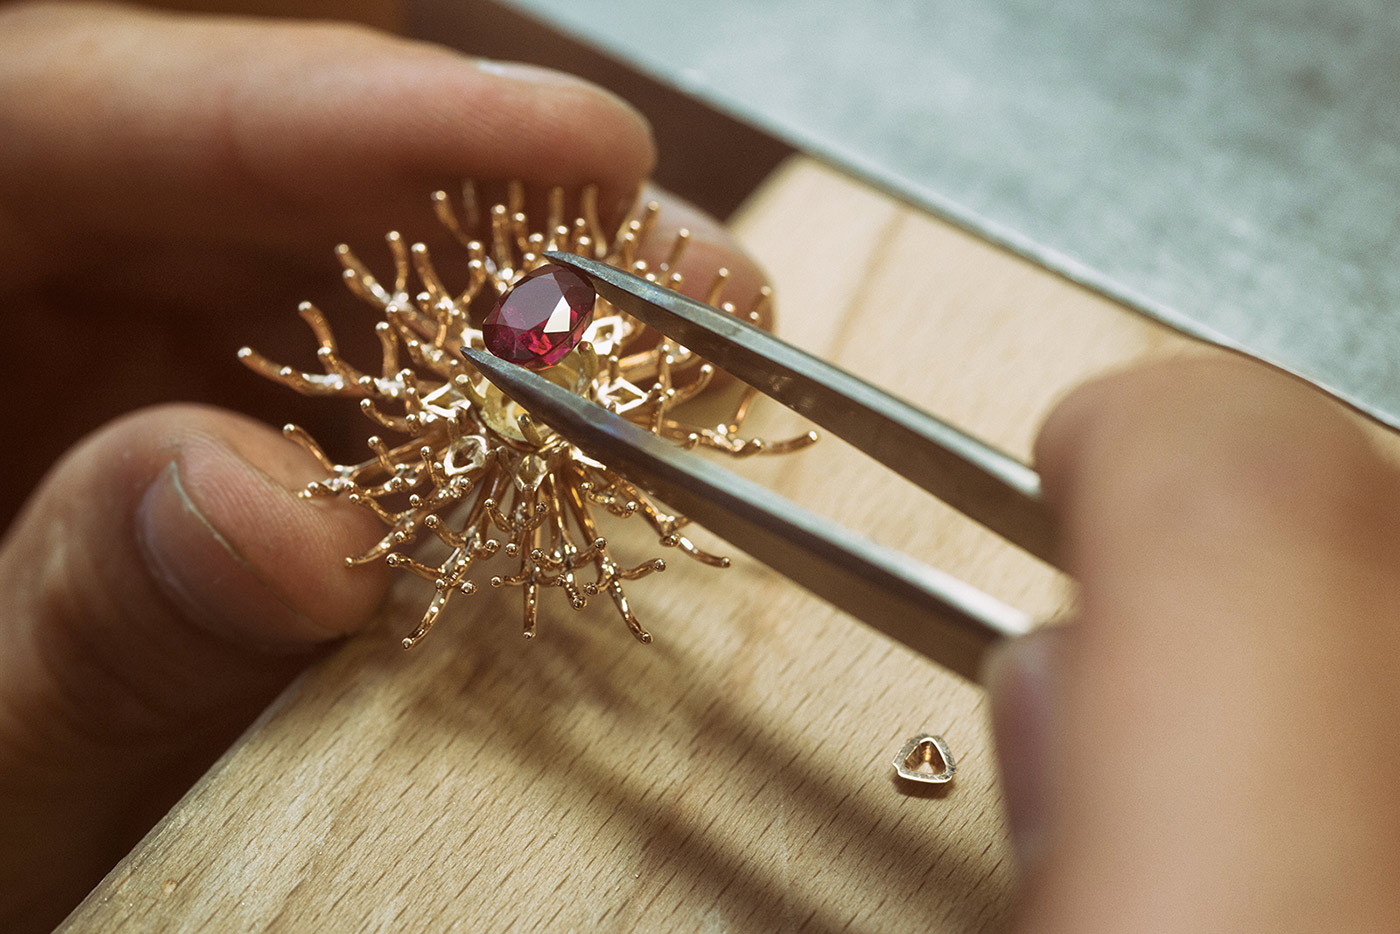 The making of Gübelin's 'Red Dahlia' ring, with the central Burmese ruby being set